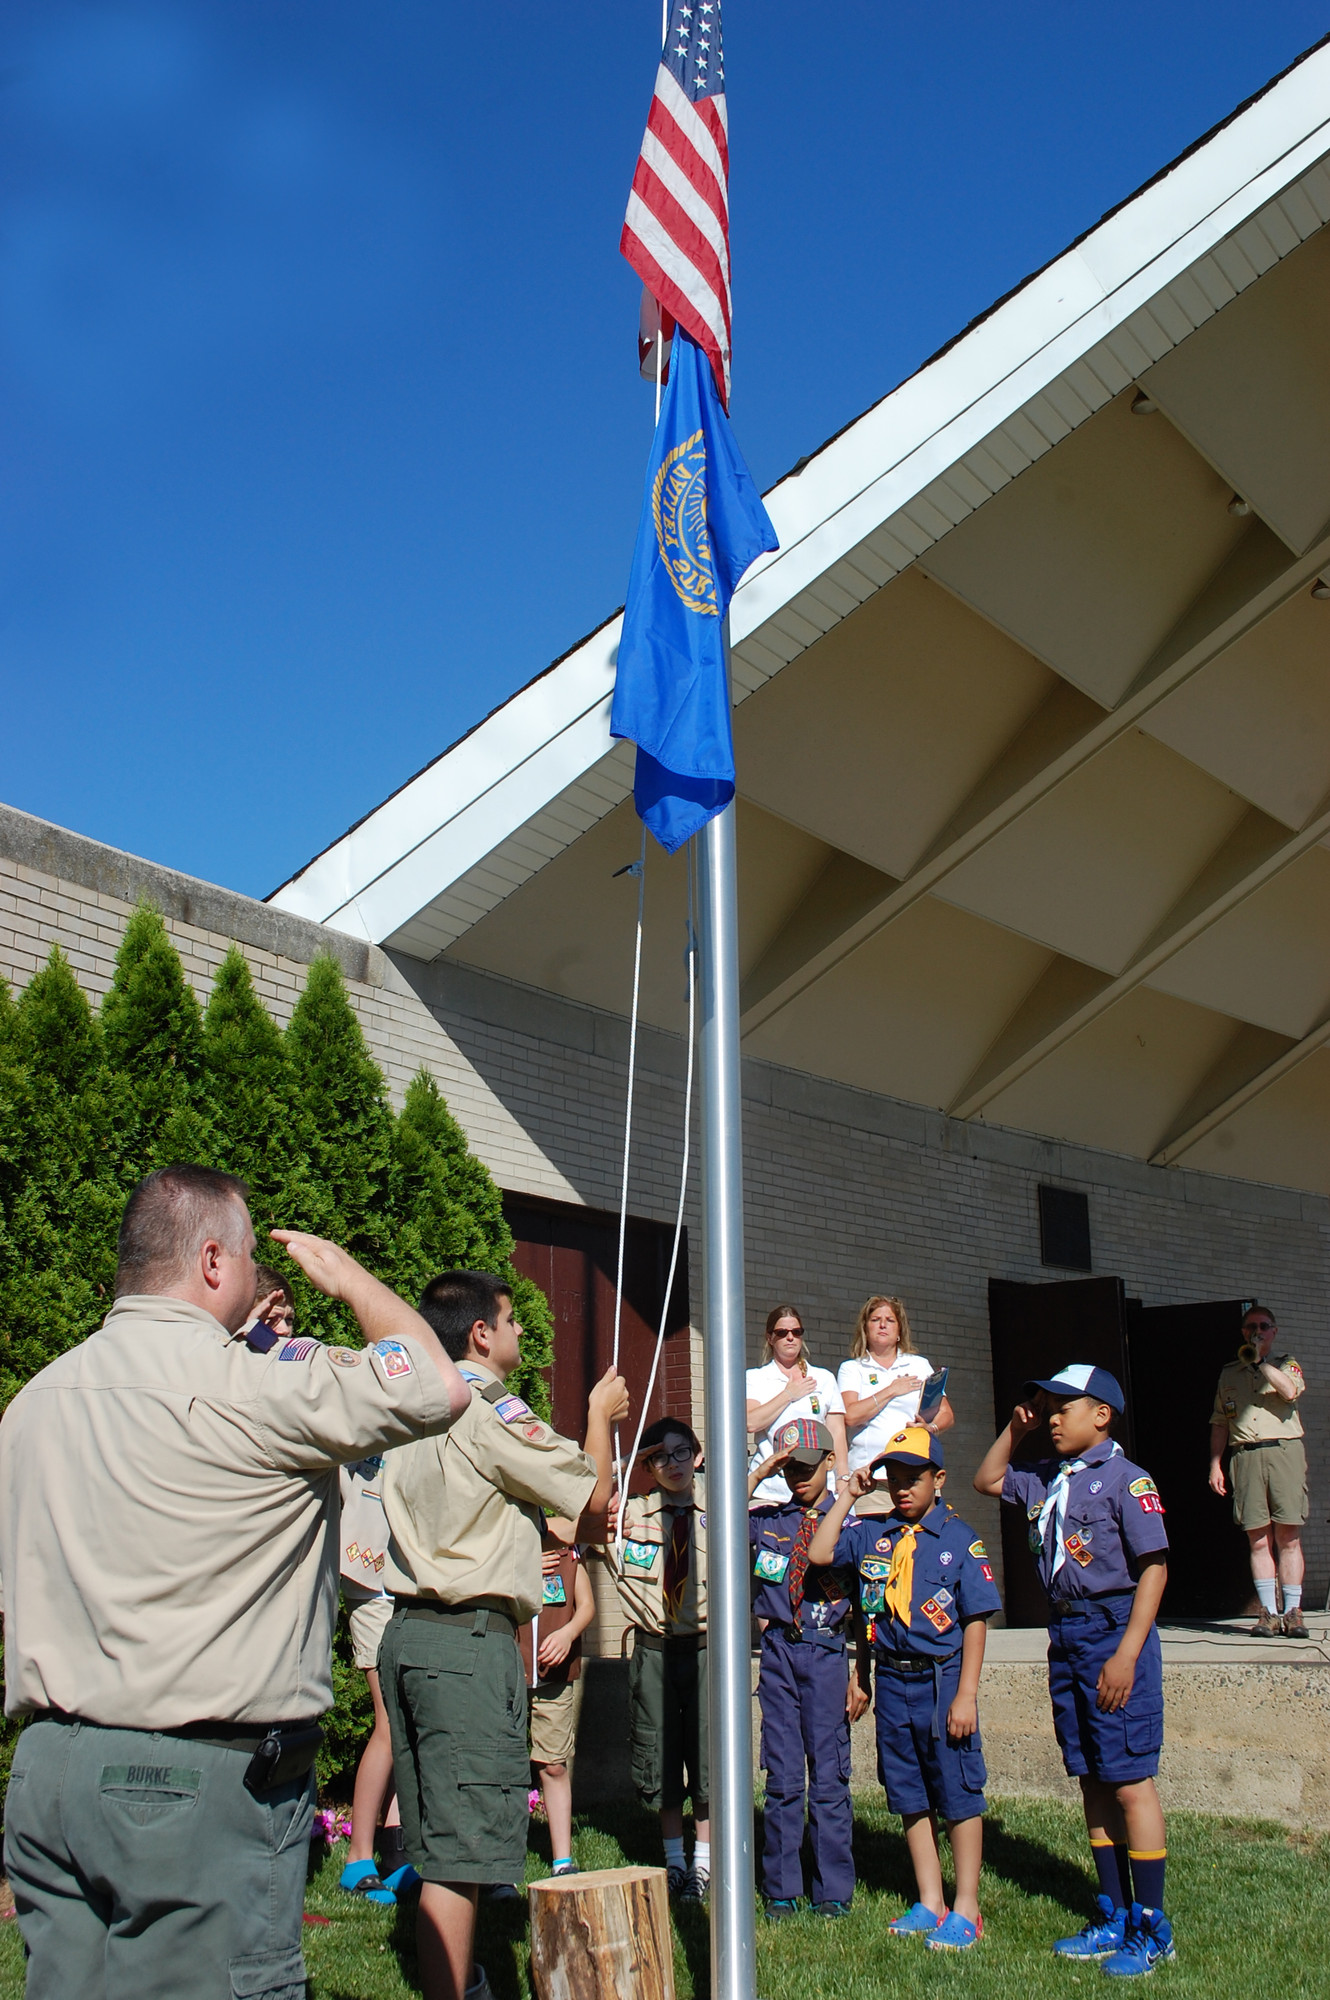 Scouts raised the flag last Saturday morning at the opening ceremony for the annual Camporee on the Village Green.